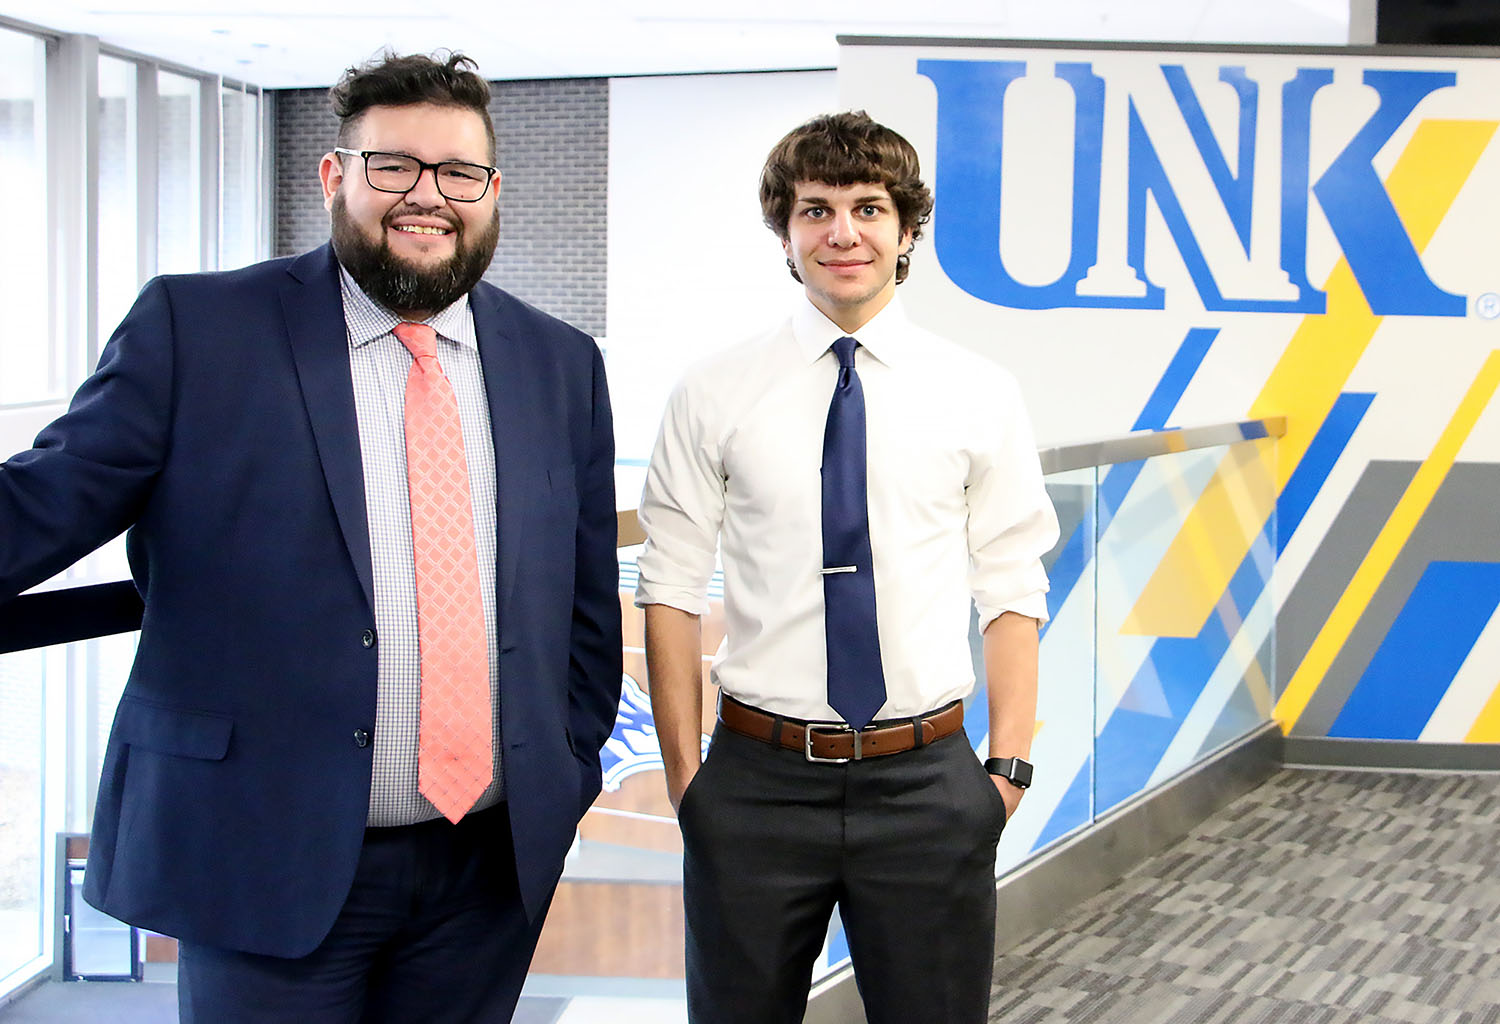 Luis Olivas, diversity recruitment and leadership coordinator in UNK’s Office of Student Diversity and Inclusion, left, and UNK student Derek Elton of Columbus are pictured inside the Nebraskan Student Union on campus. Elton is one of 13 students selected for the new Student Diversity Leadership Program led by Olivas.